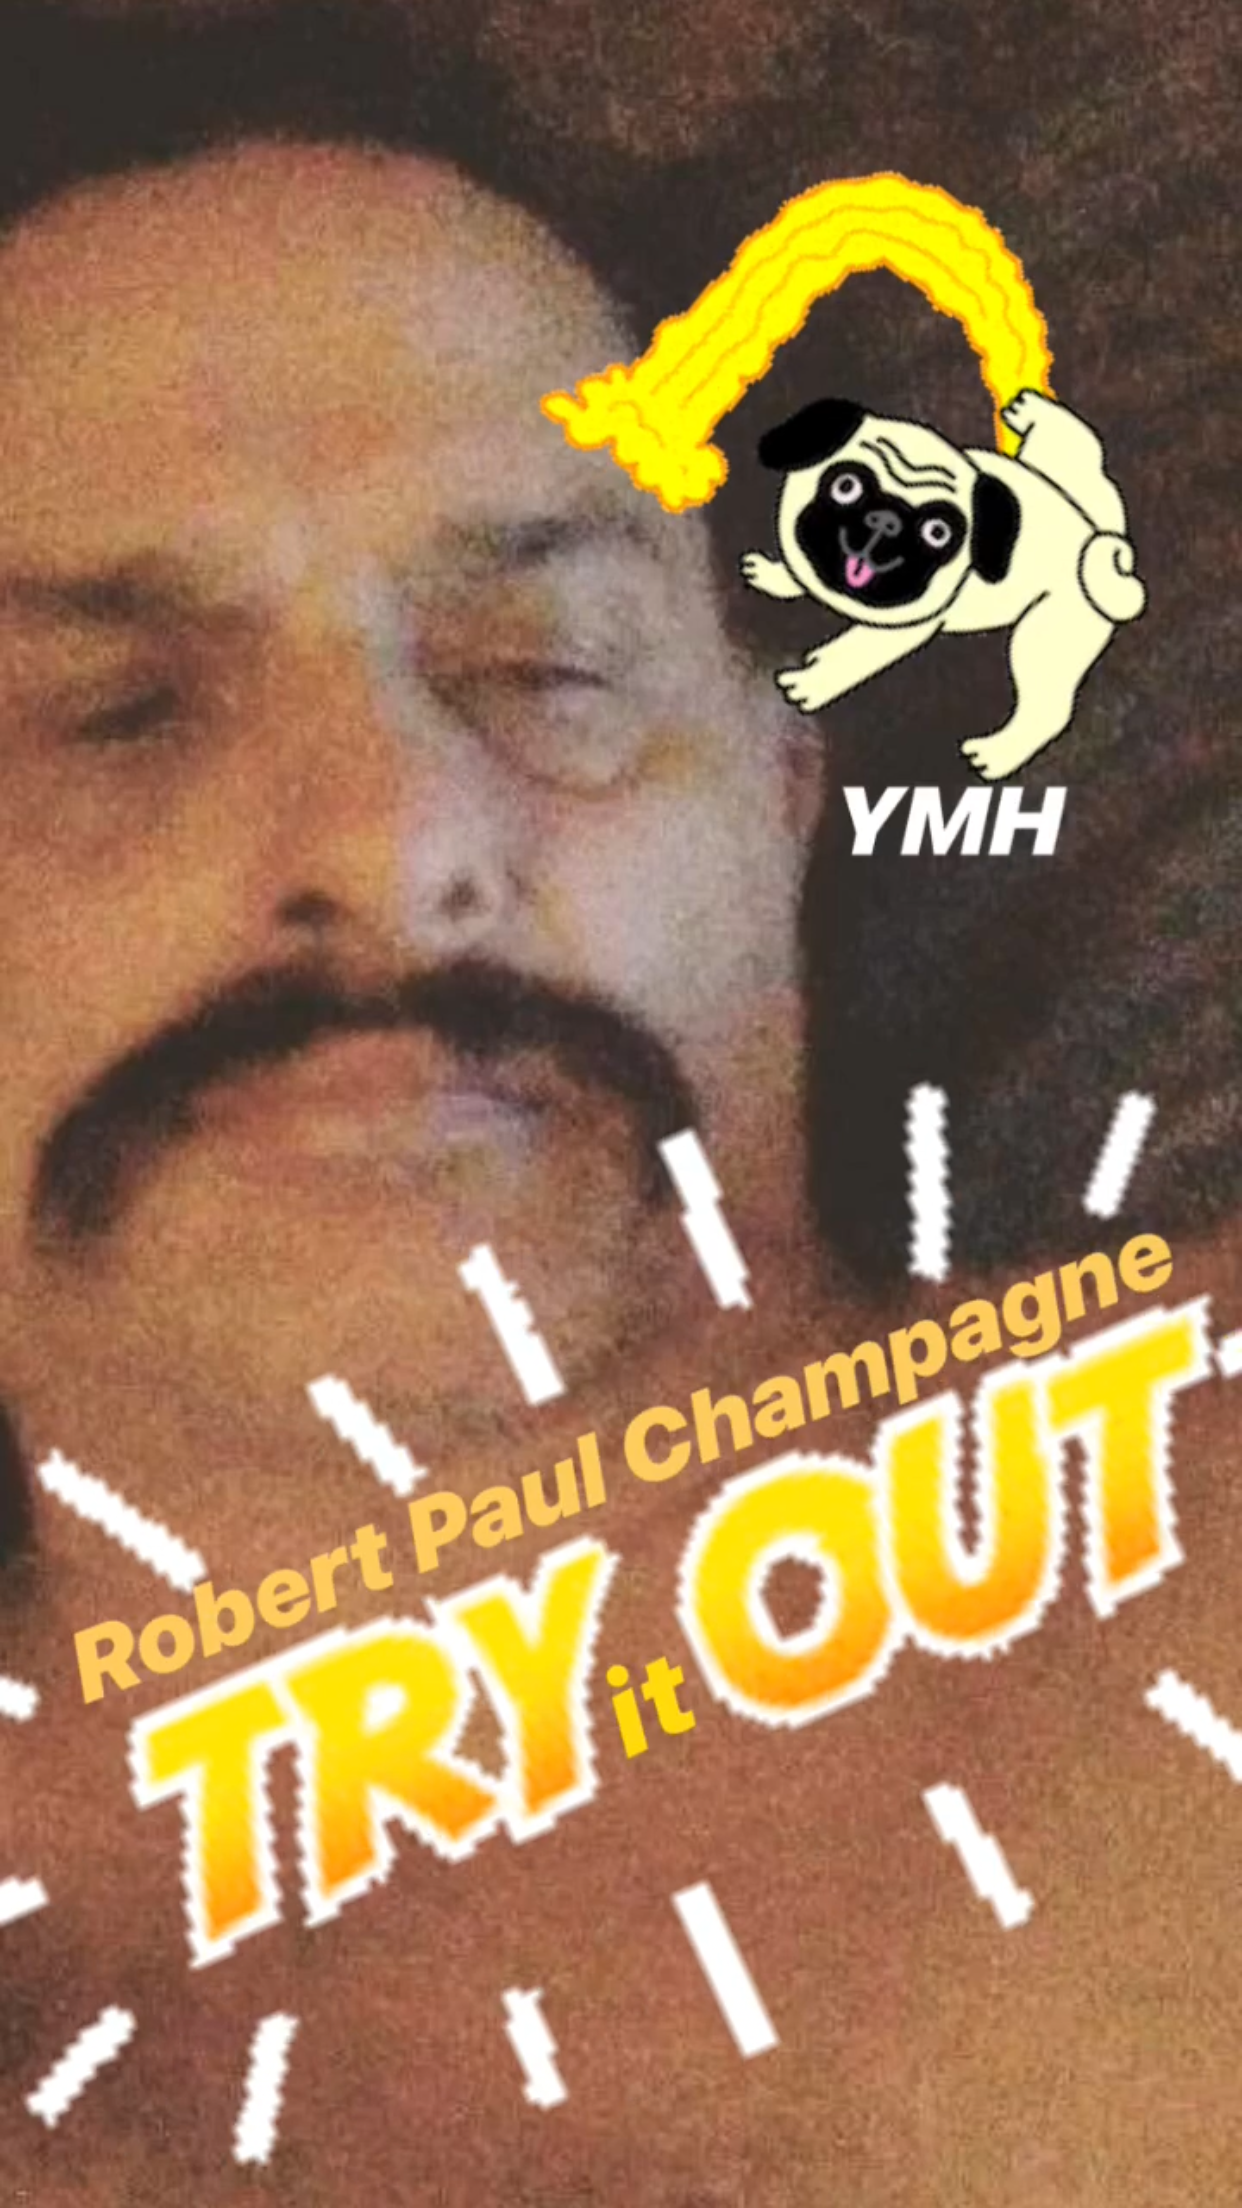 Instagram champagne robert paul Who Is